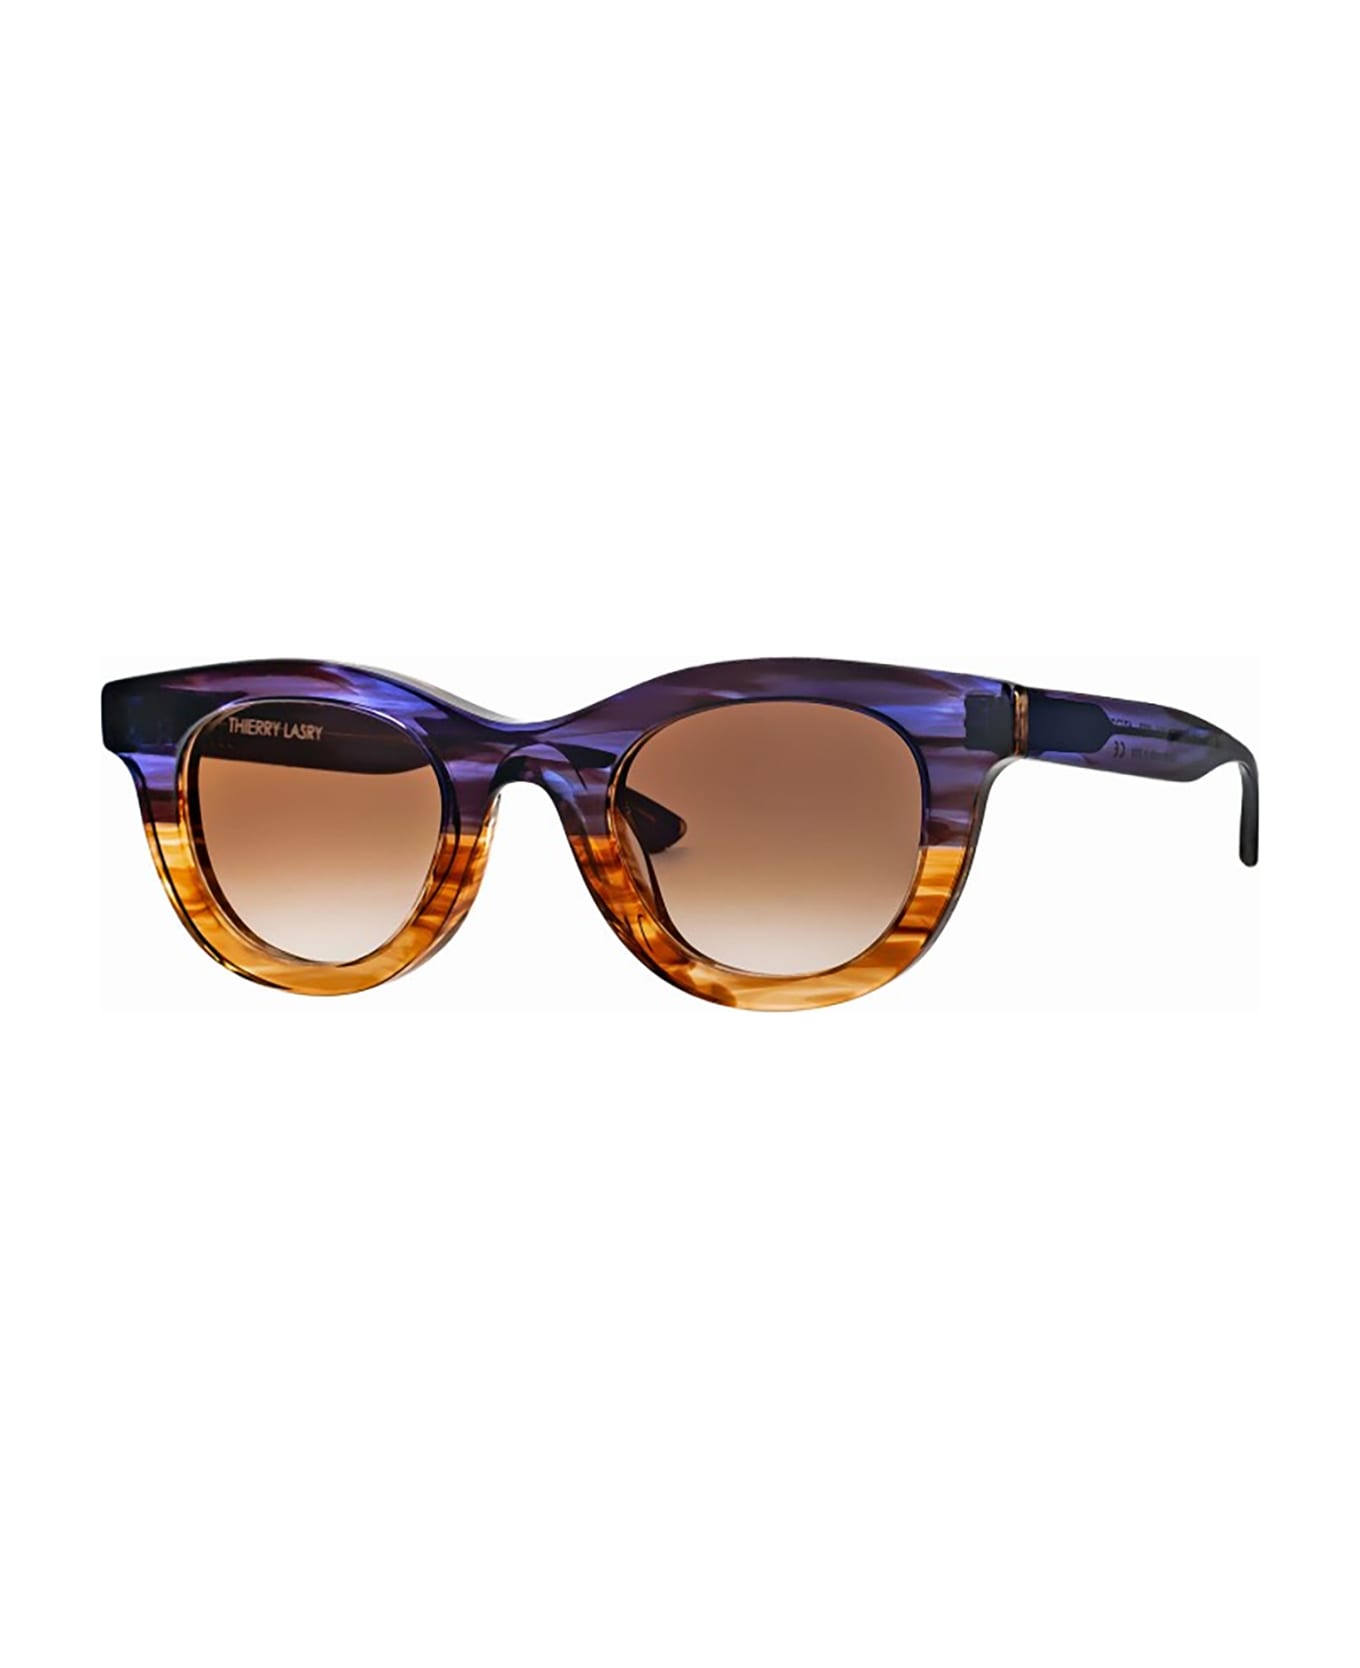 Thierry Lasry CONSISTENCY Sunglasses